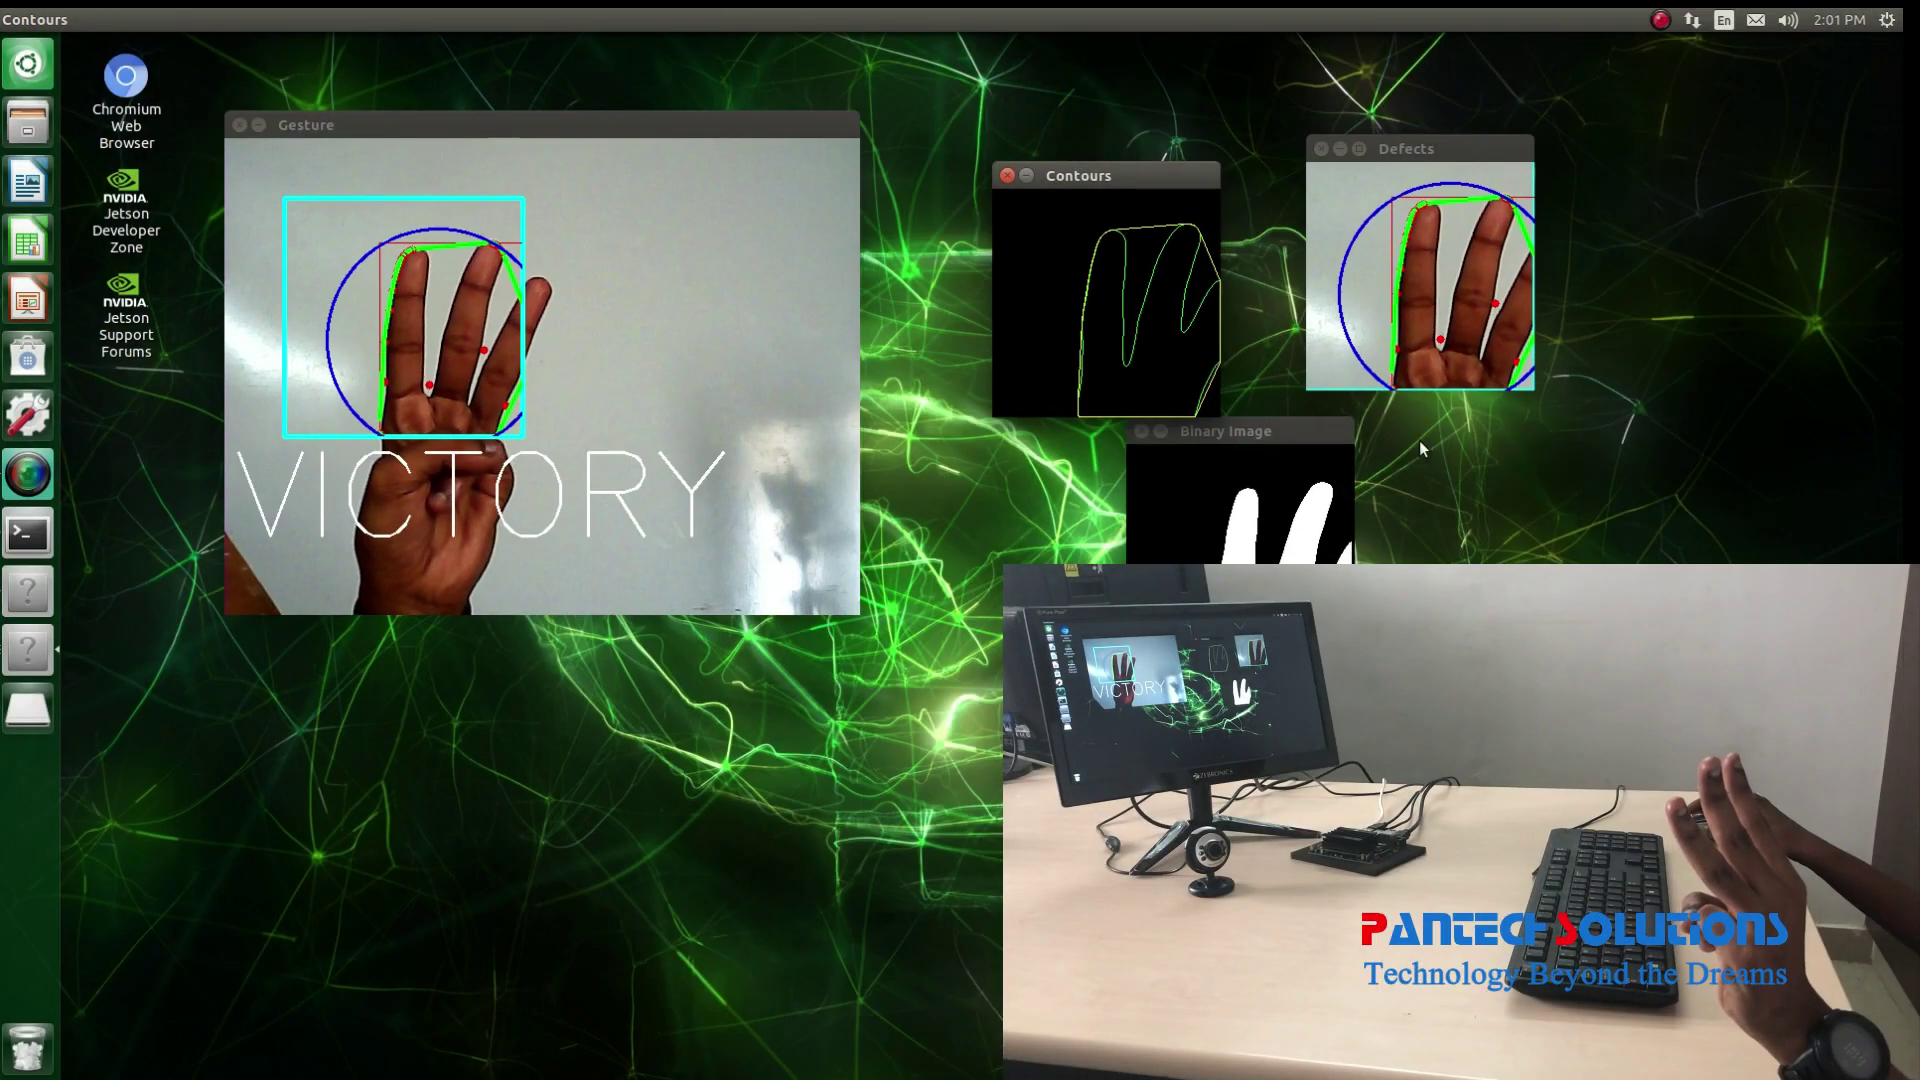 Gesture recognition using Jetson Nano